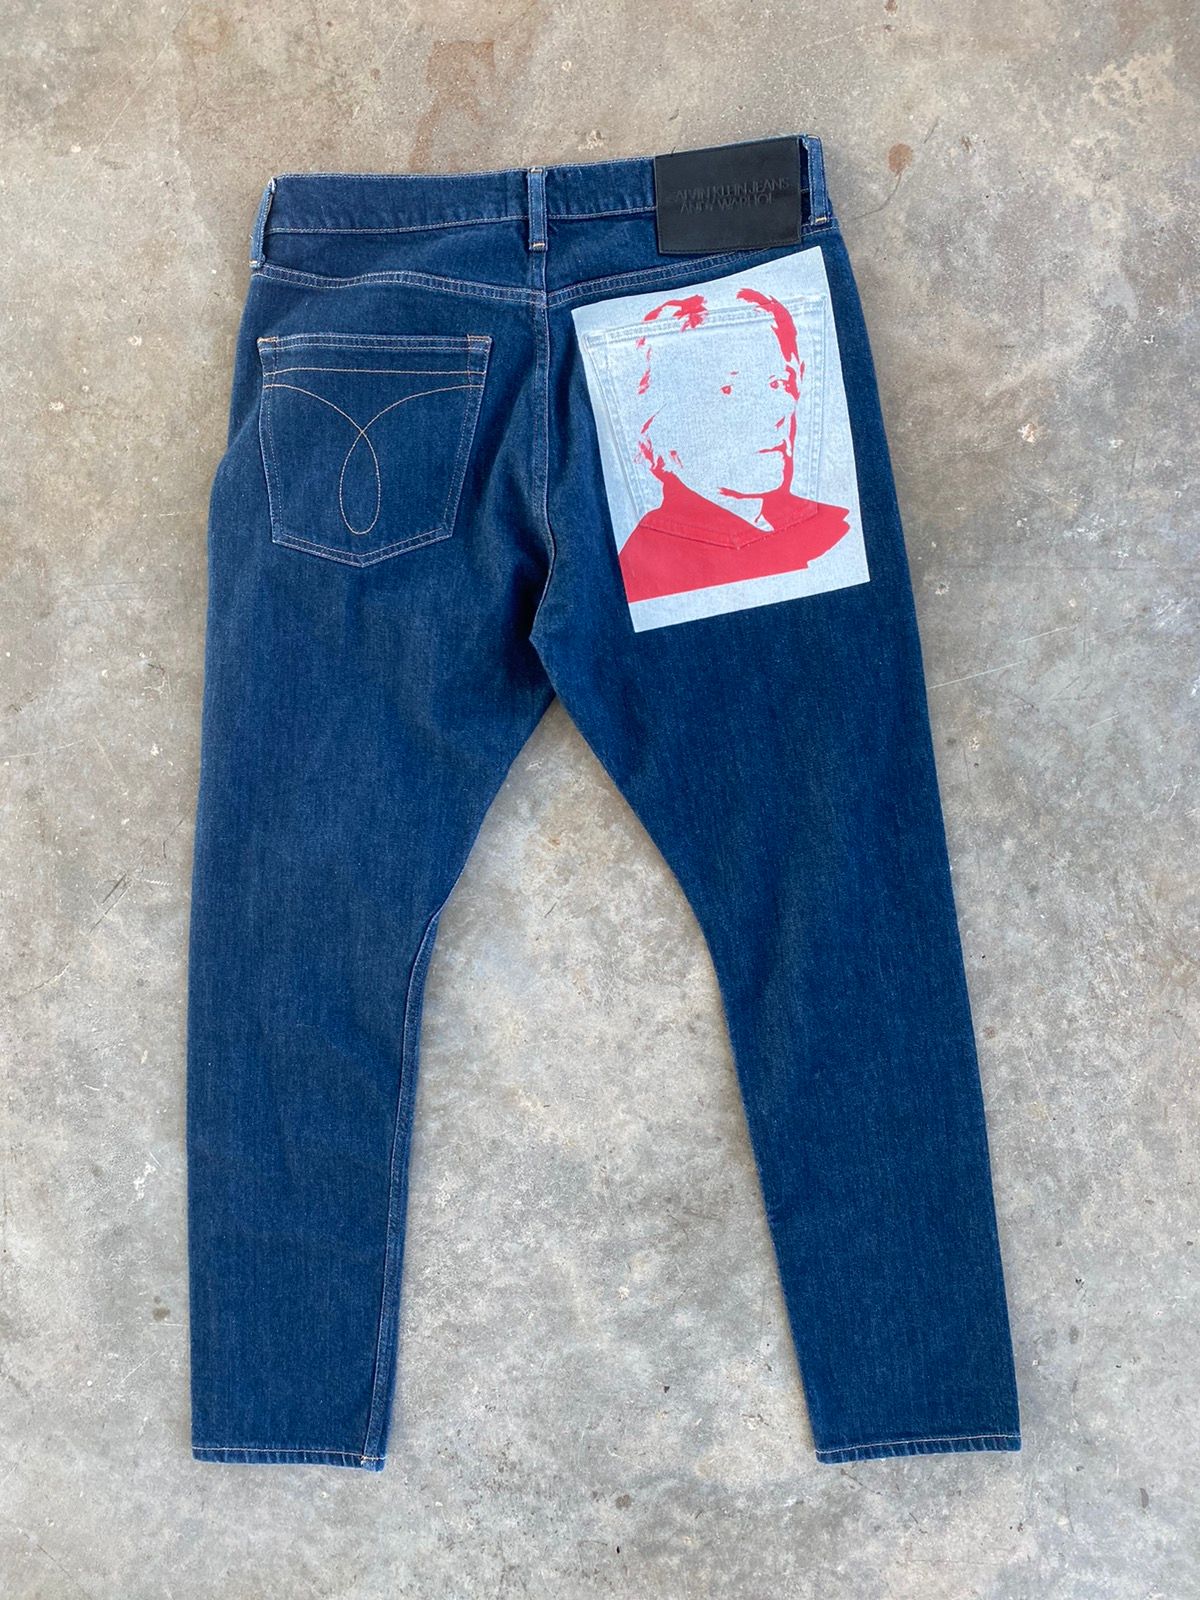 Pre-owned Andy Warhol X Calvin Klein Andy Warhol By Raf Simons Denim Jeans Sz. 32 In Blue